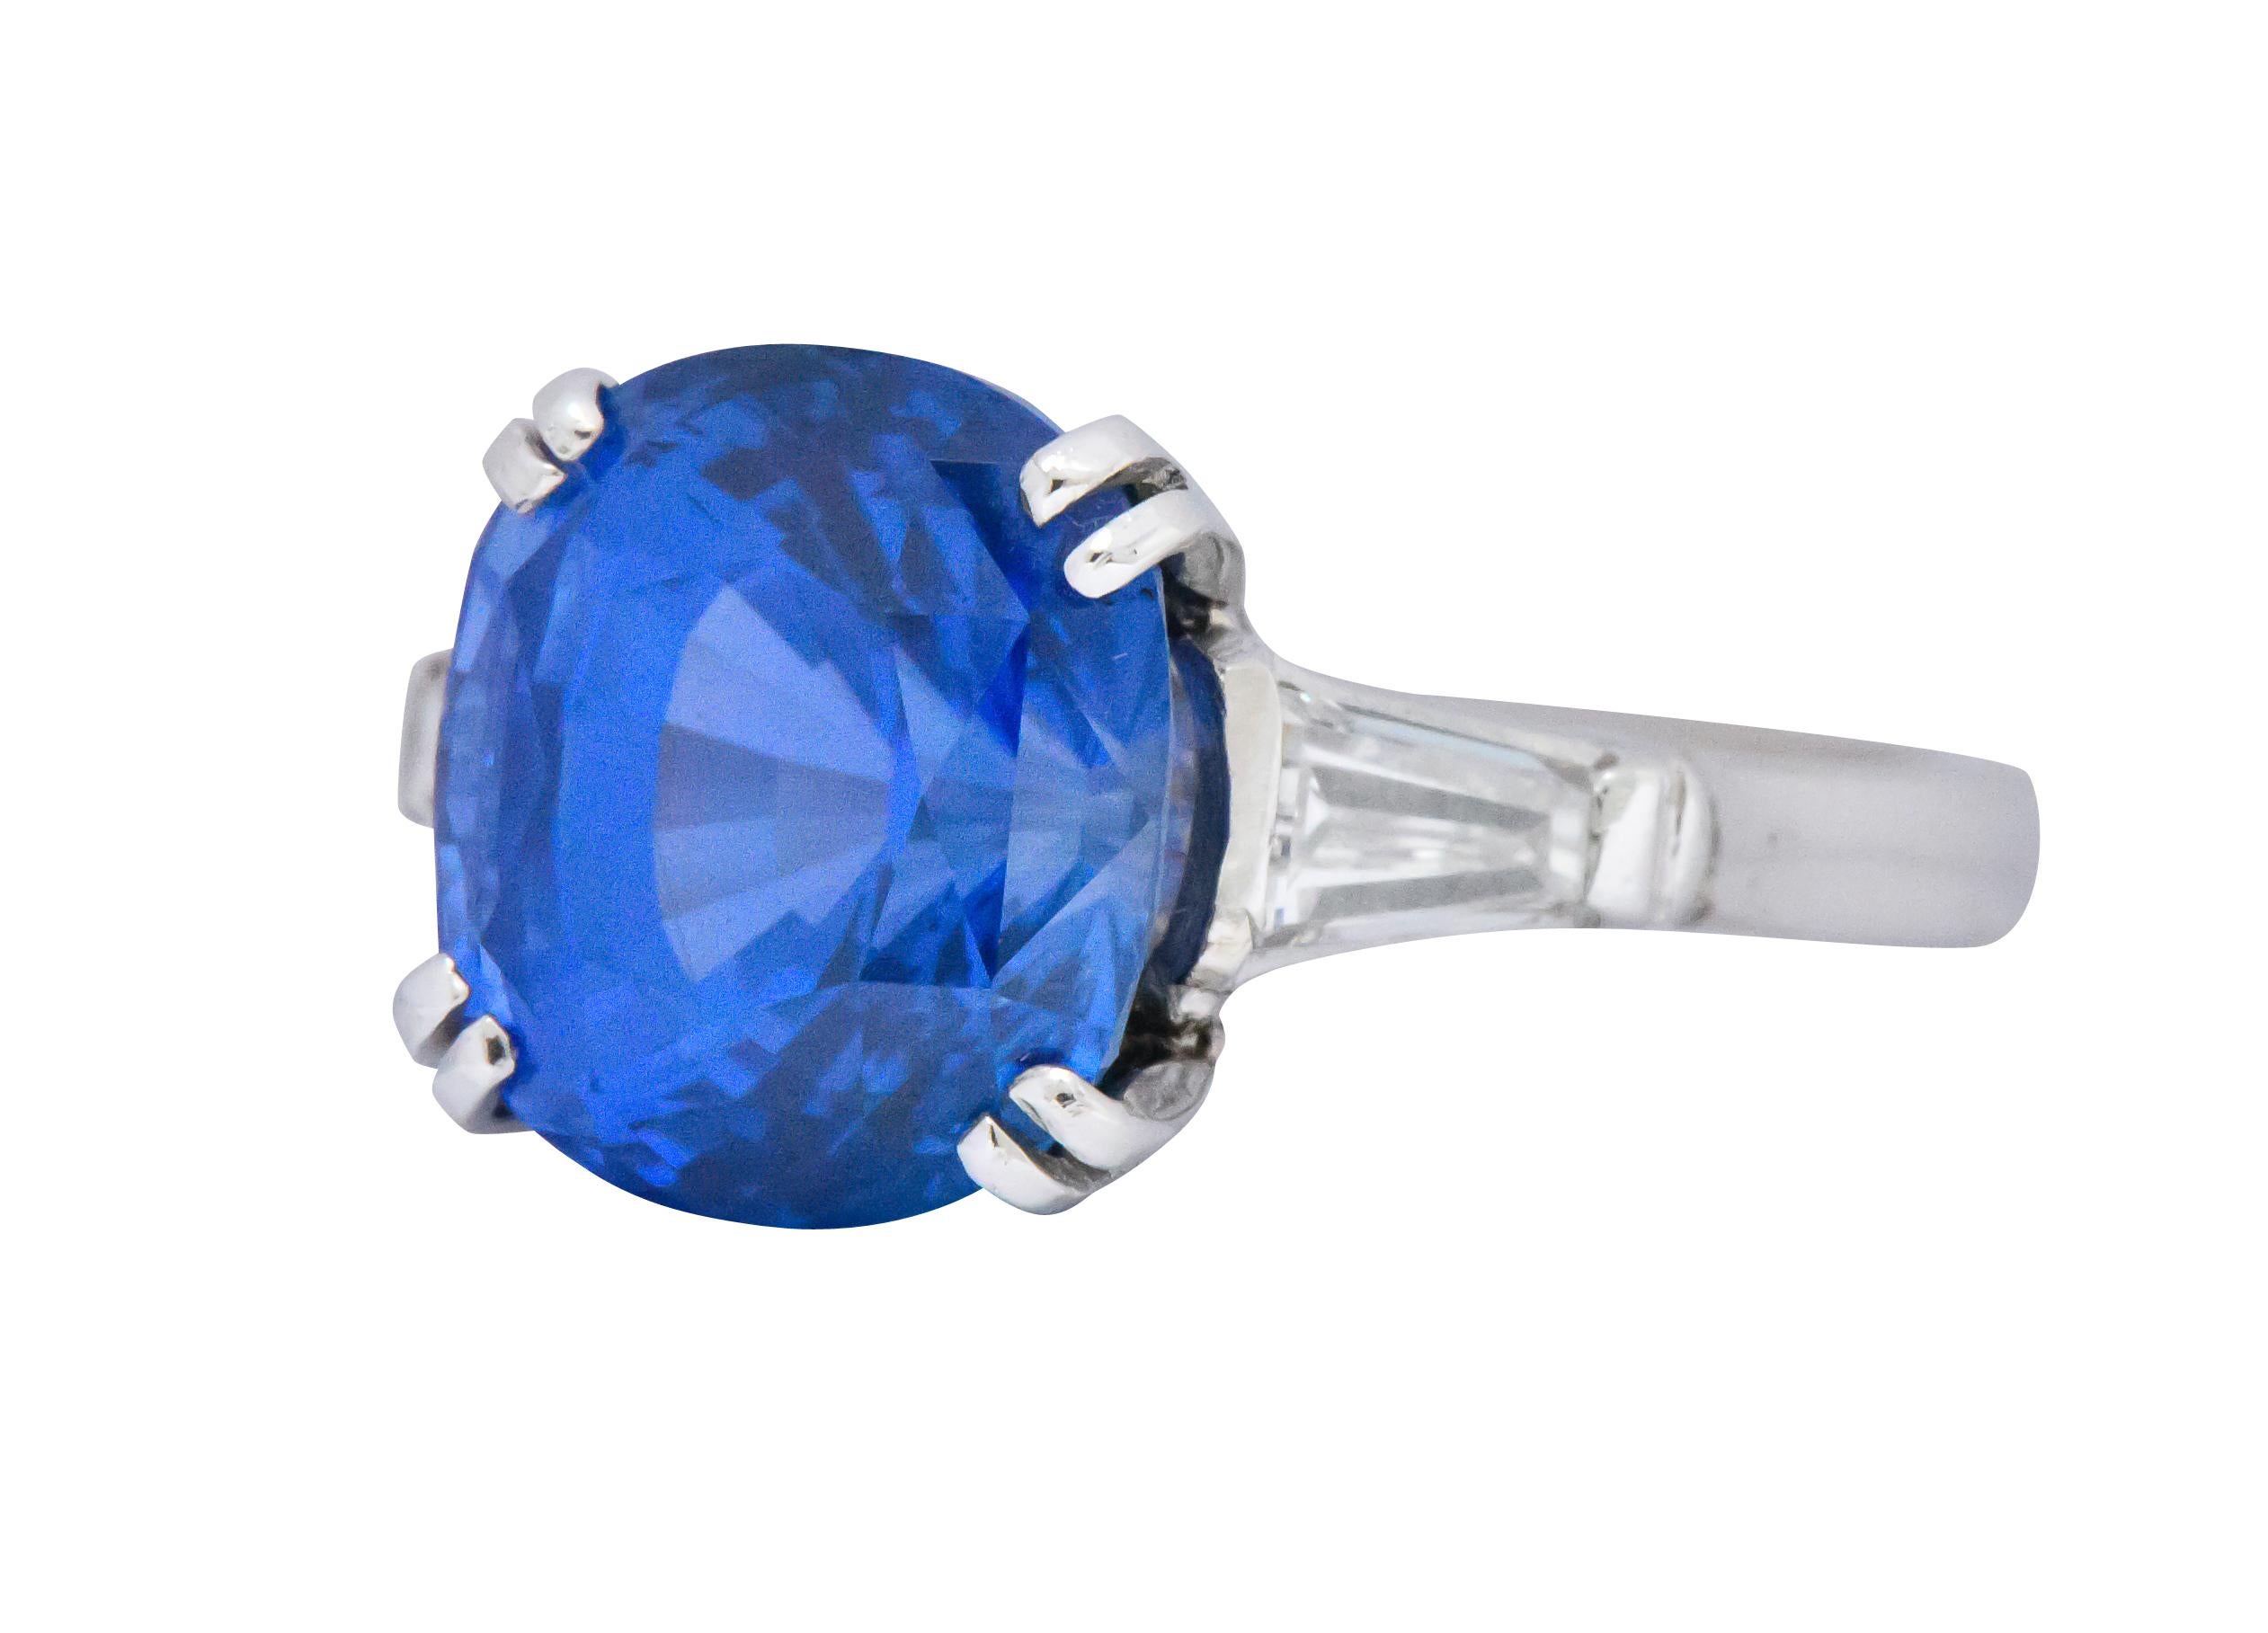 Centering a basket set cushion cut Ceylon sapphire weighing 8.12 carats, bright blue in color with no evidence of heat

Flanked by two tapered baguette cut diamonds weighing approximately 0.50 carat total, G/H color with VS clarity

Cathedral style